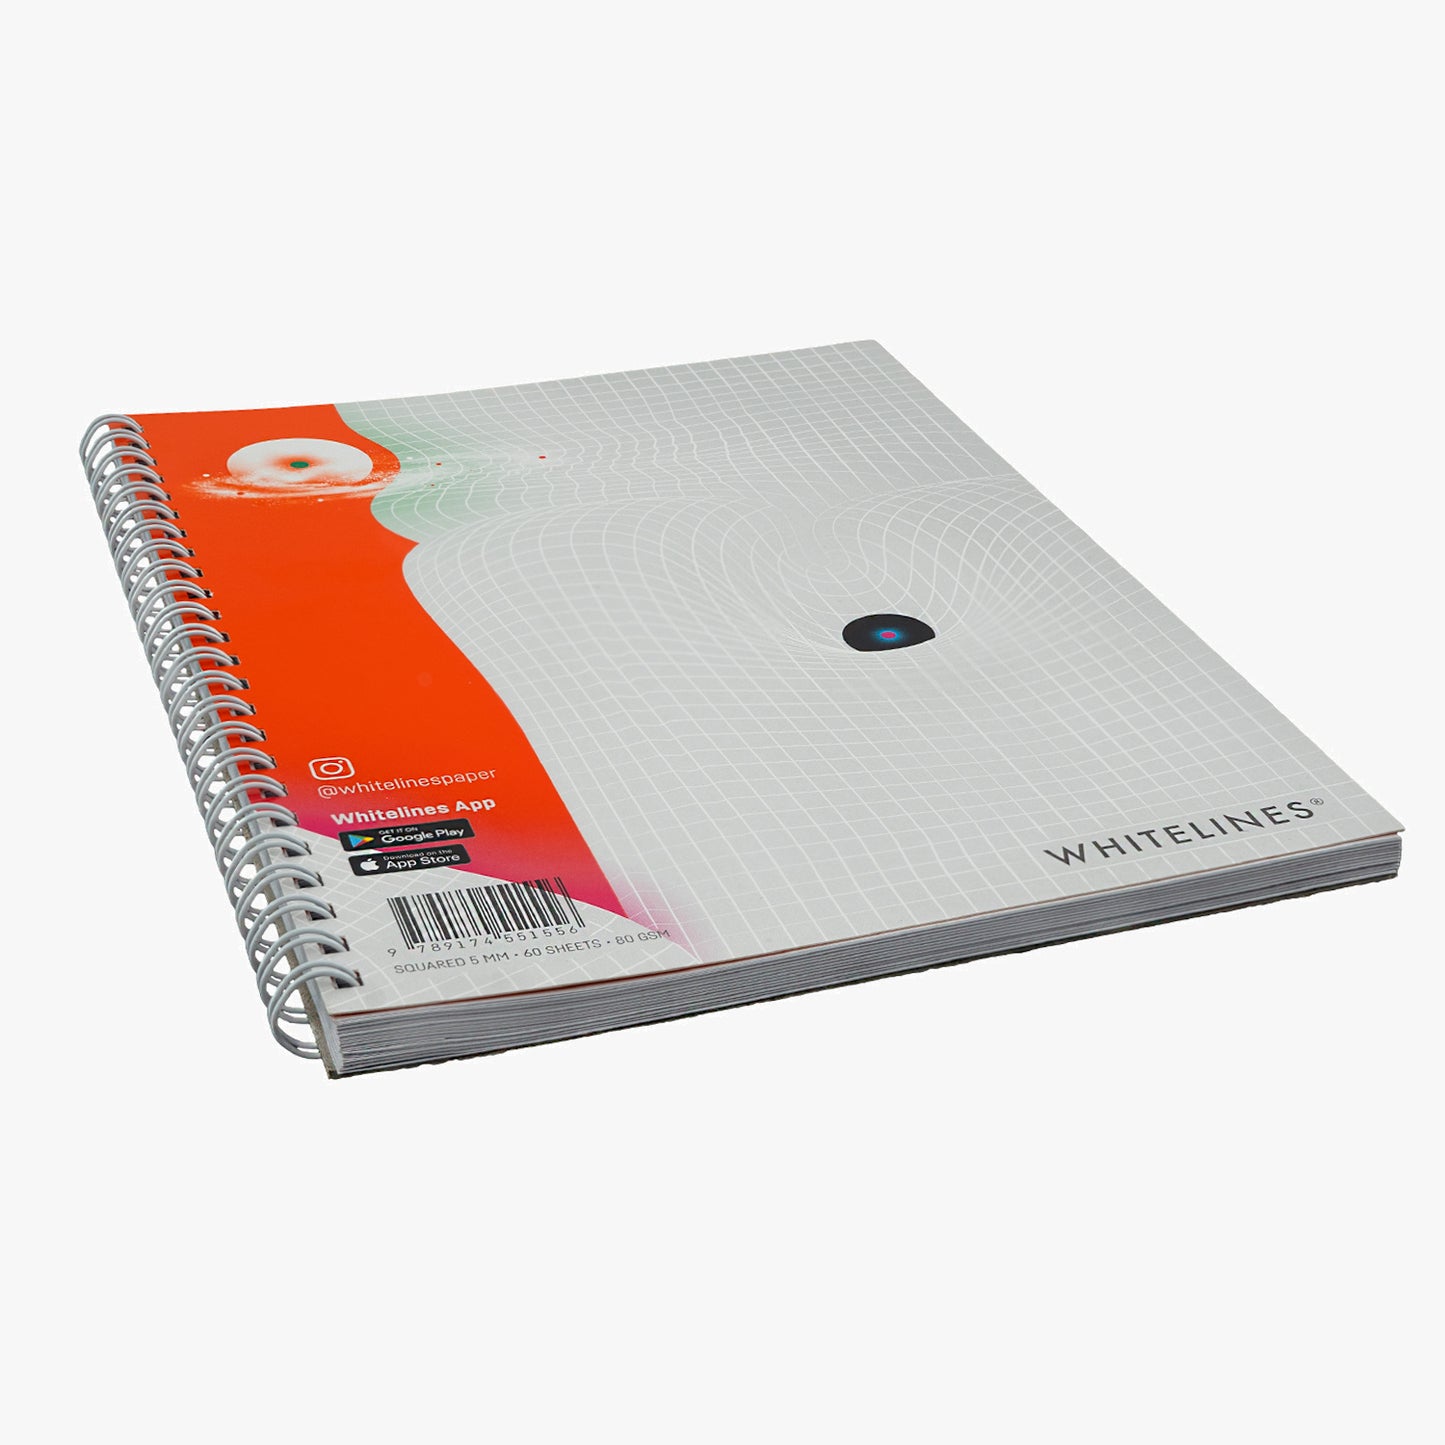 Whitelines Revelations A5 Graphed/Squared Notebook perfect for writing, sketching, journaling, drawing, working and studying effectively